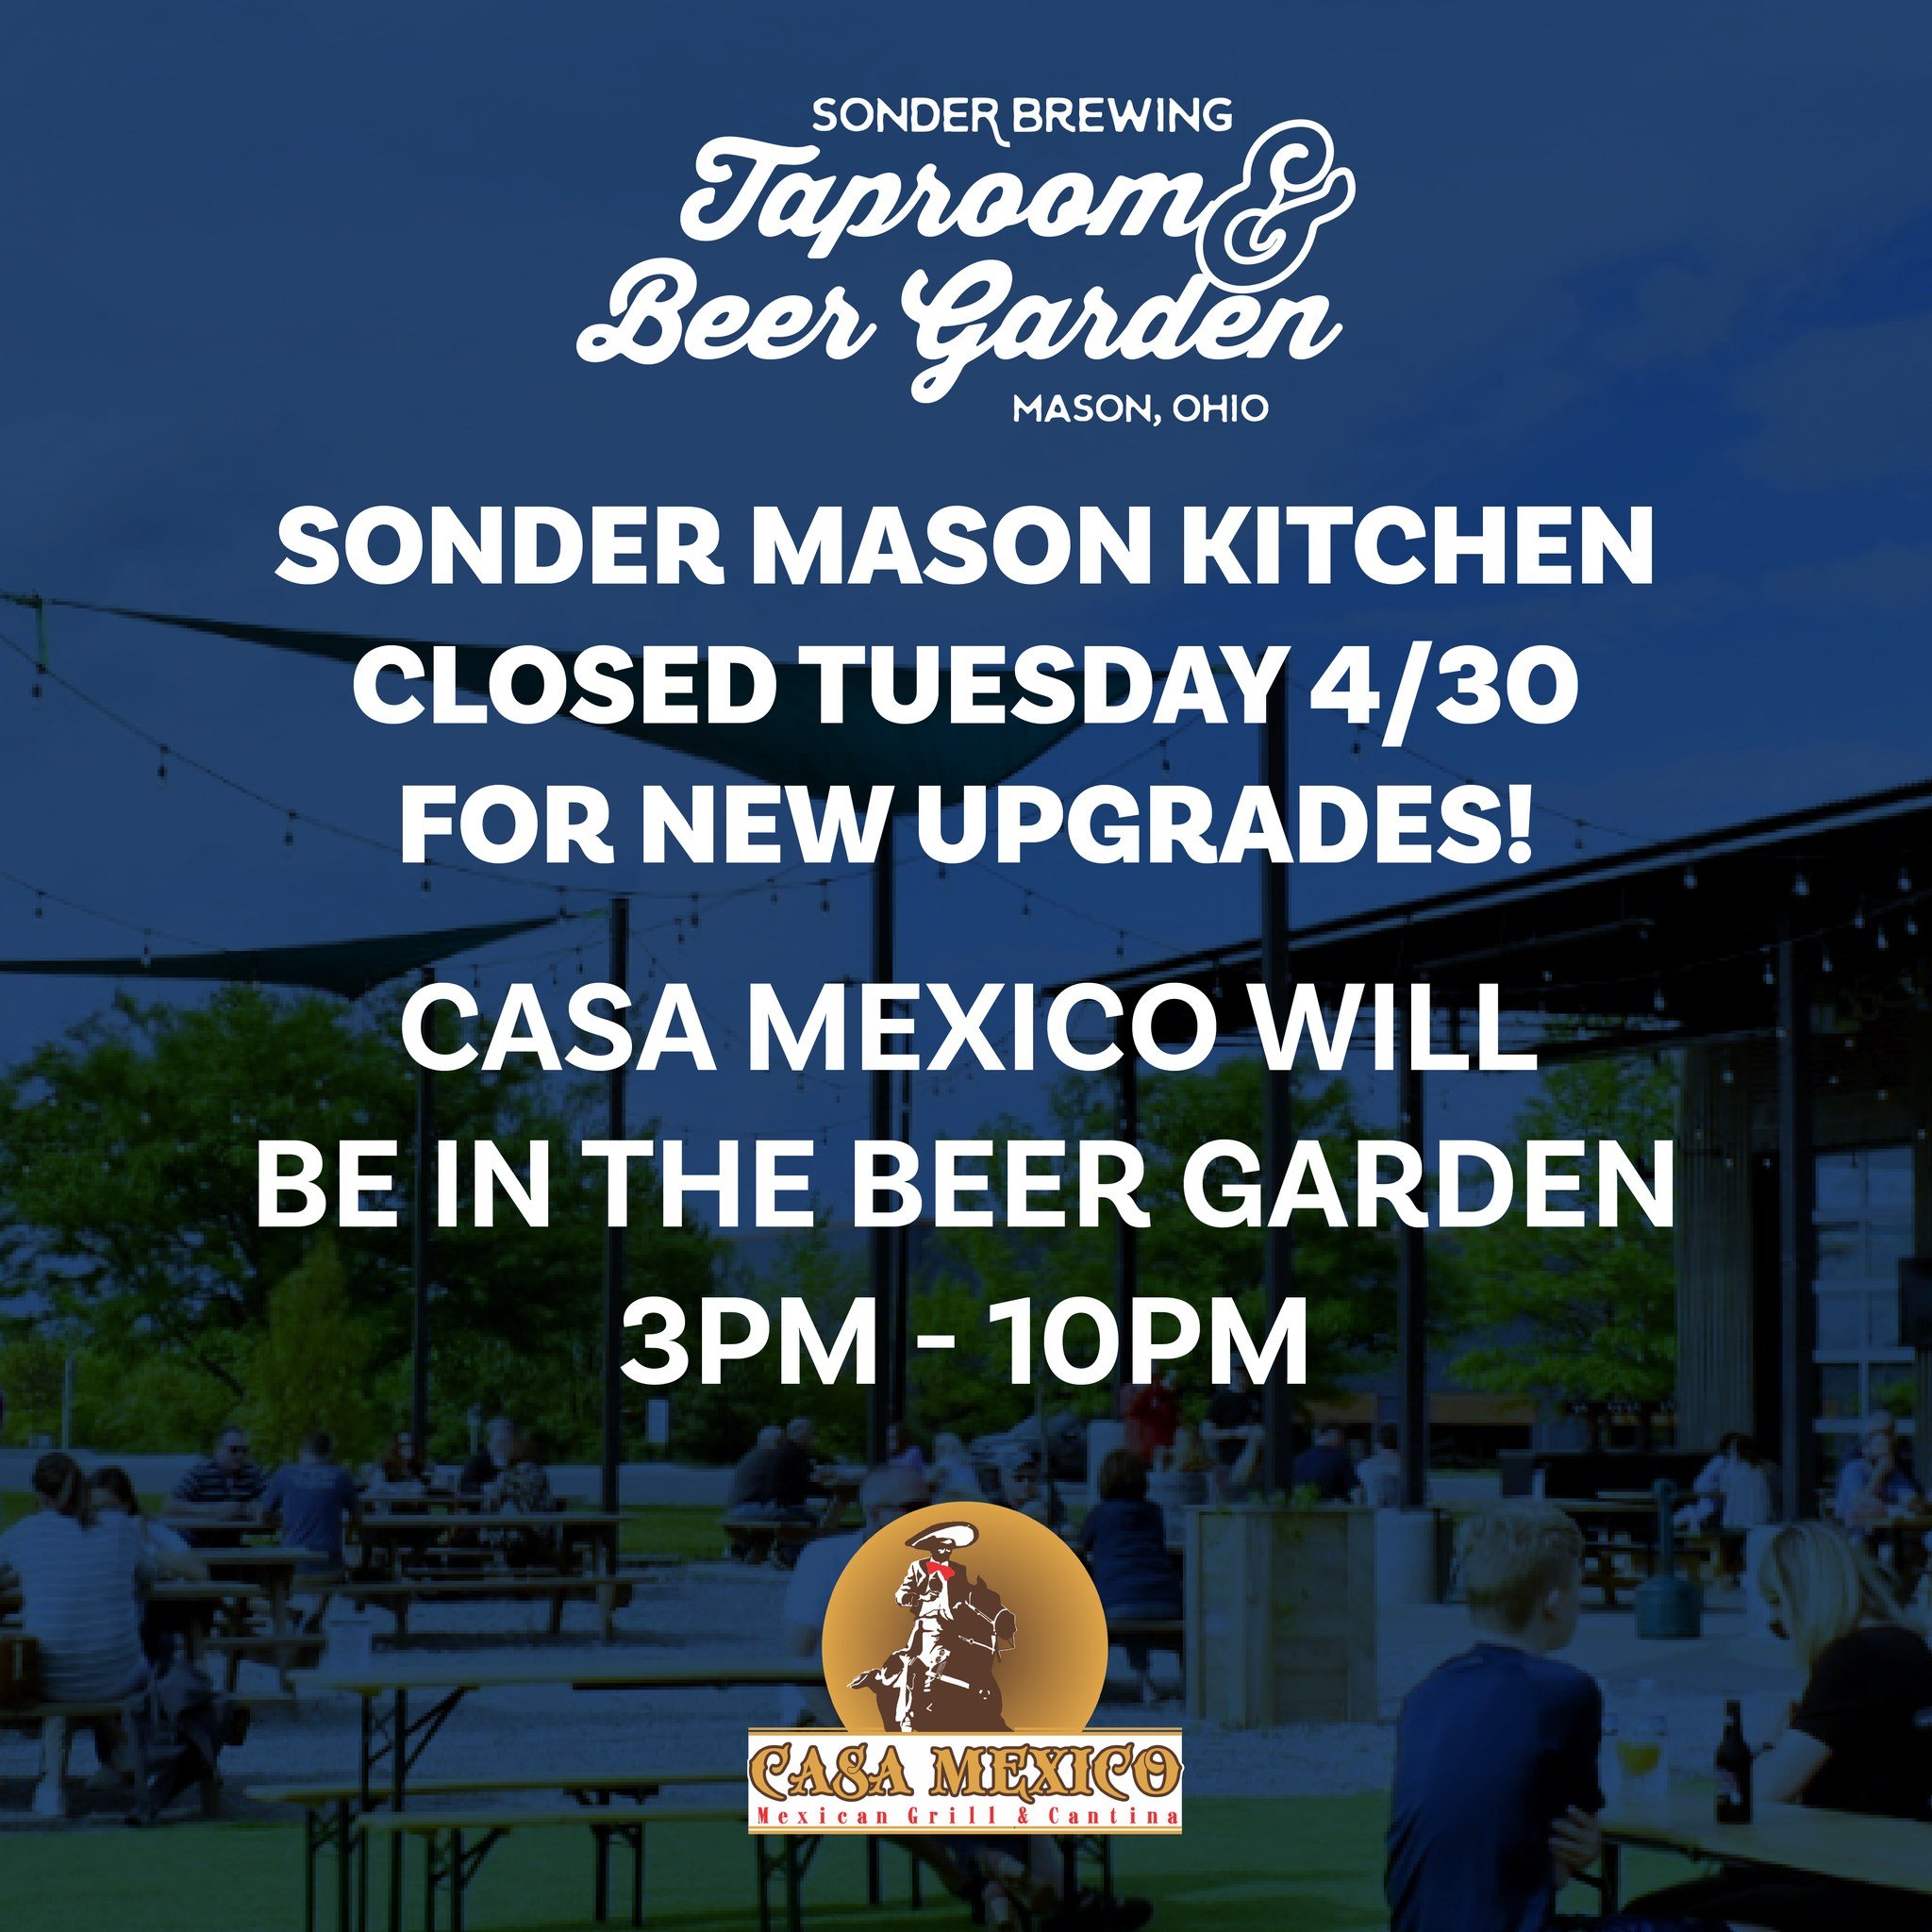 Casa Mexico will be back at Sonder Mason Taproom &amp; Beer Garden while we add some upgrades to our kitchen! Stop by and see them from 3pm to 10pm 🍻🌮

#SonderBrewing #UniquelyCrafted